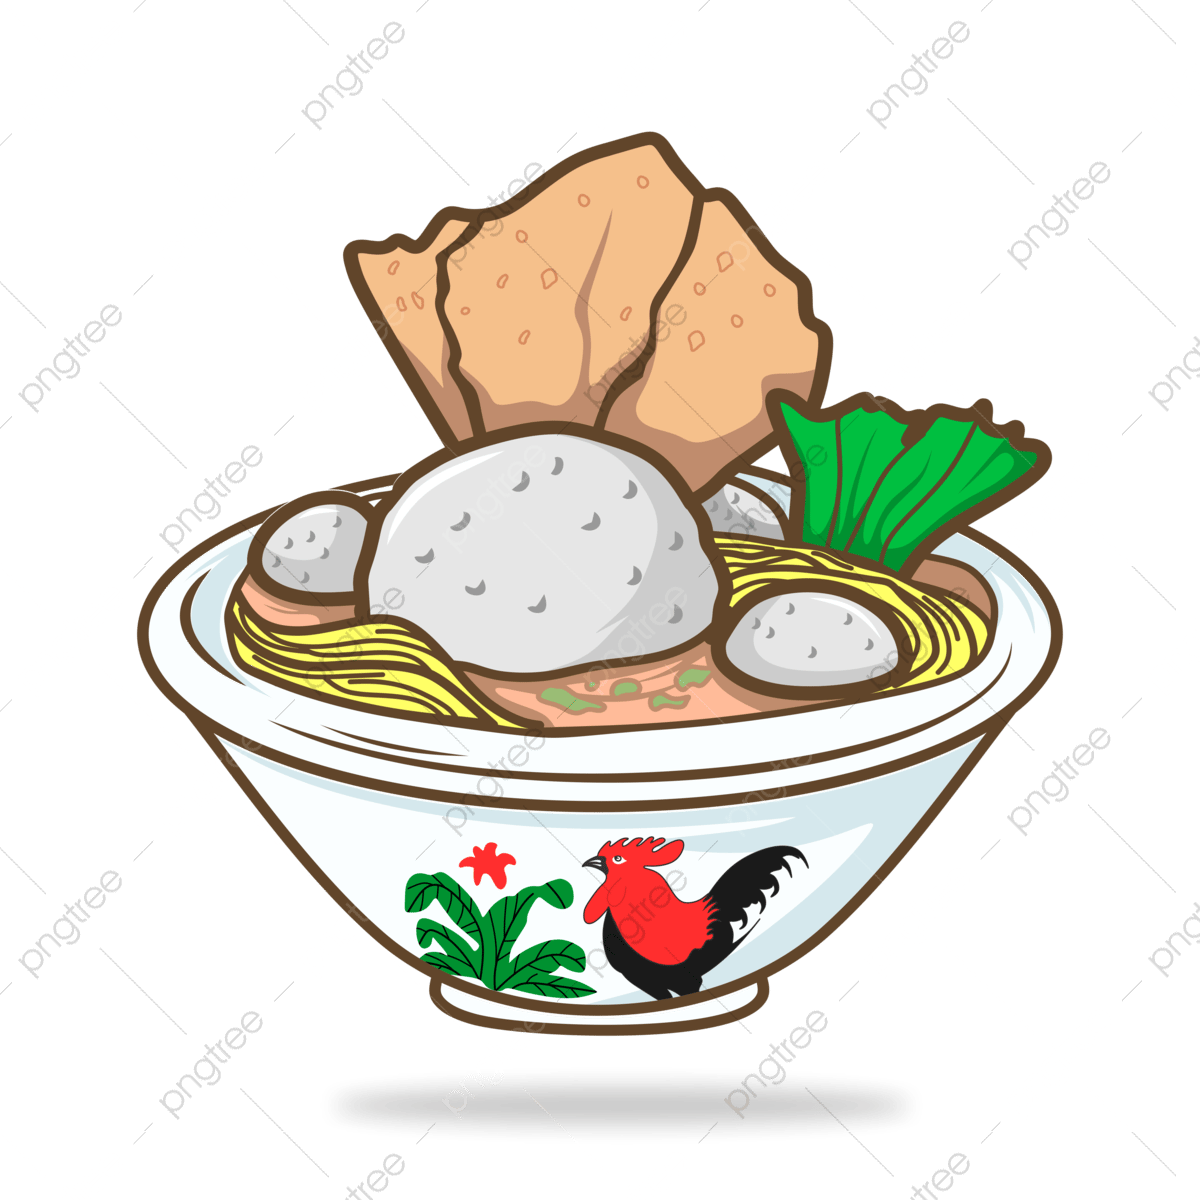 Download Free 100 Bakso Wallpapers